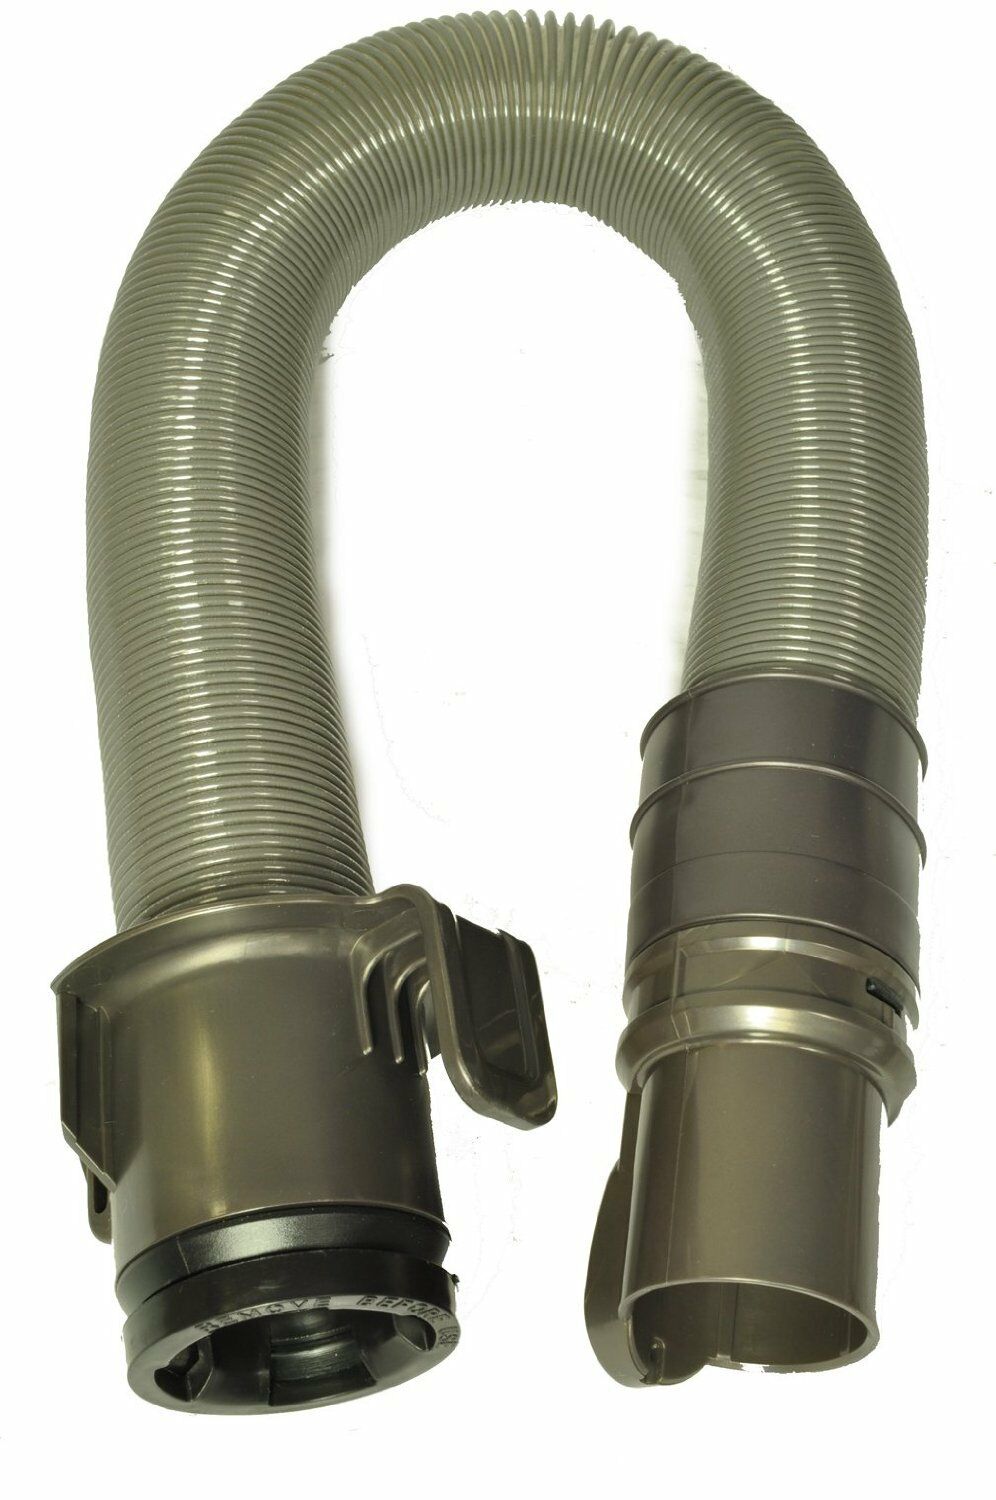 Dyson Dc25 Bagless Vacuum Cleaner Hose Assembly Aftermarket Part 10-1109-25